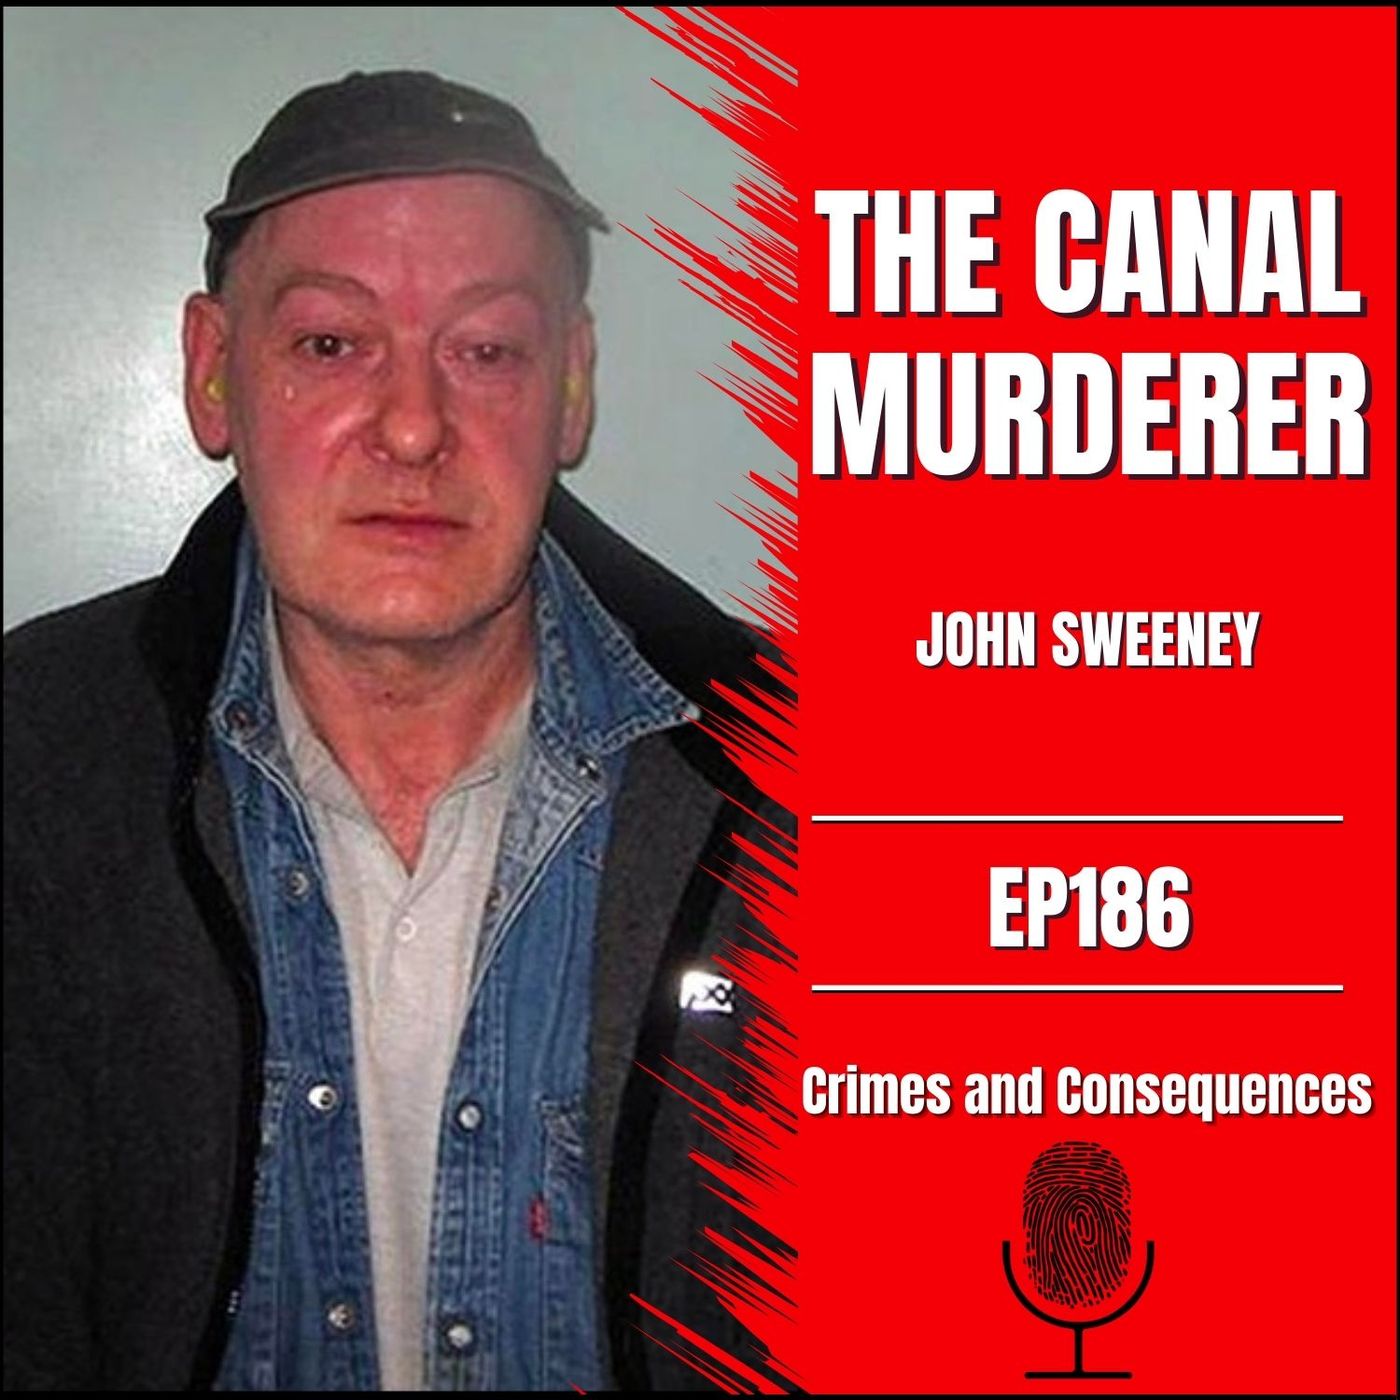 EP186: The Canal Murderer